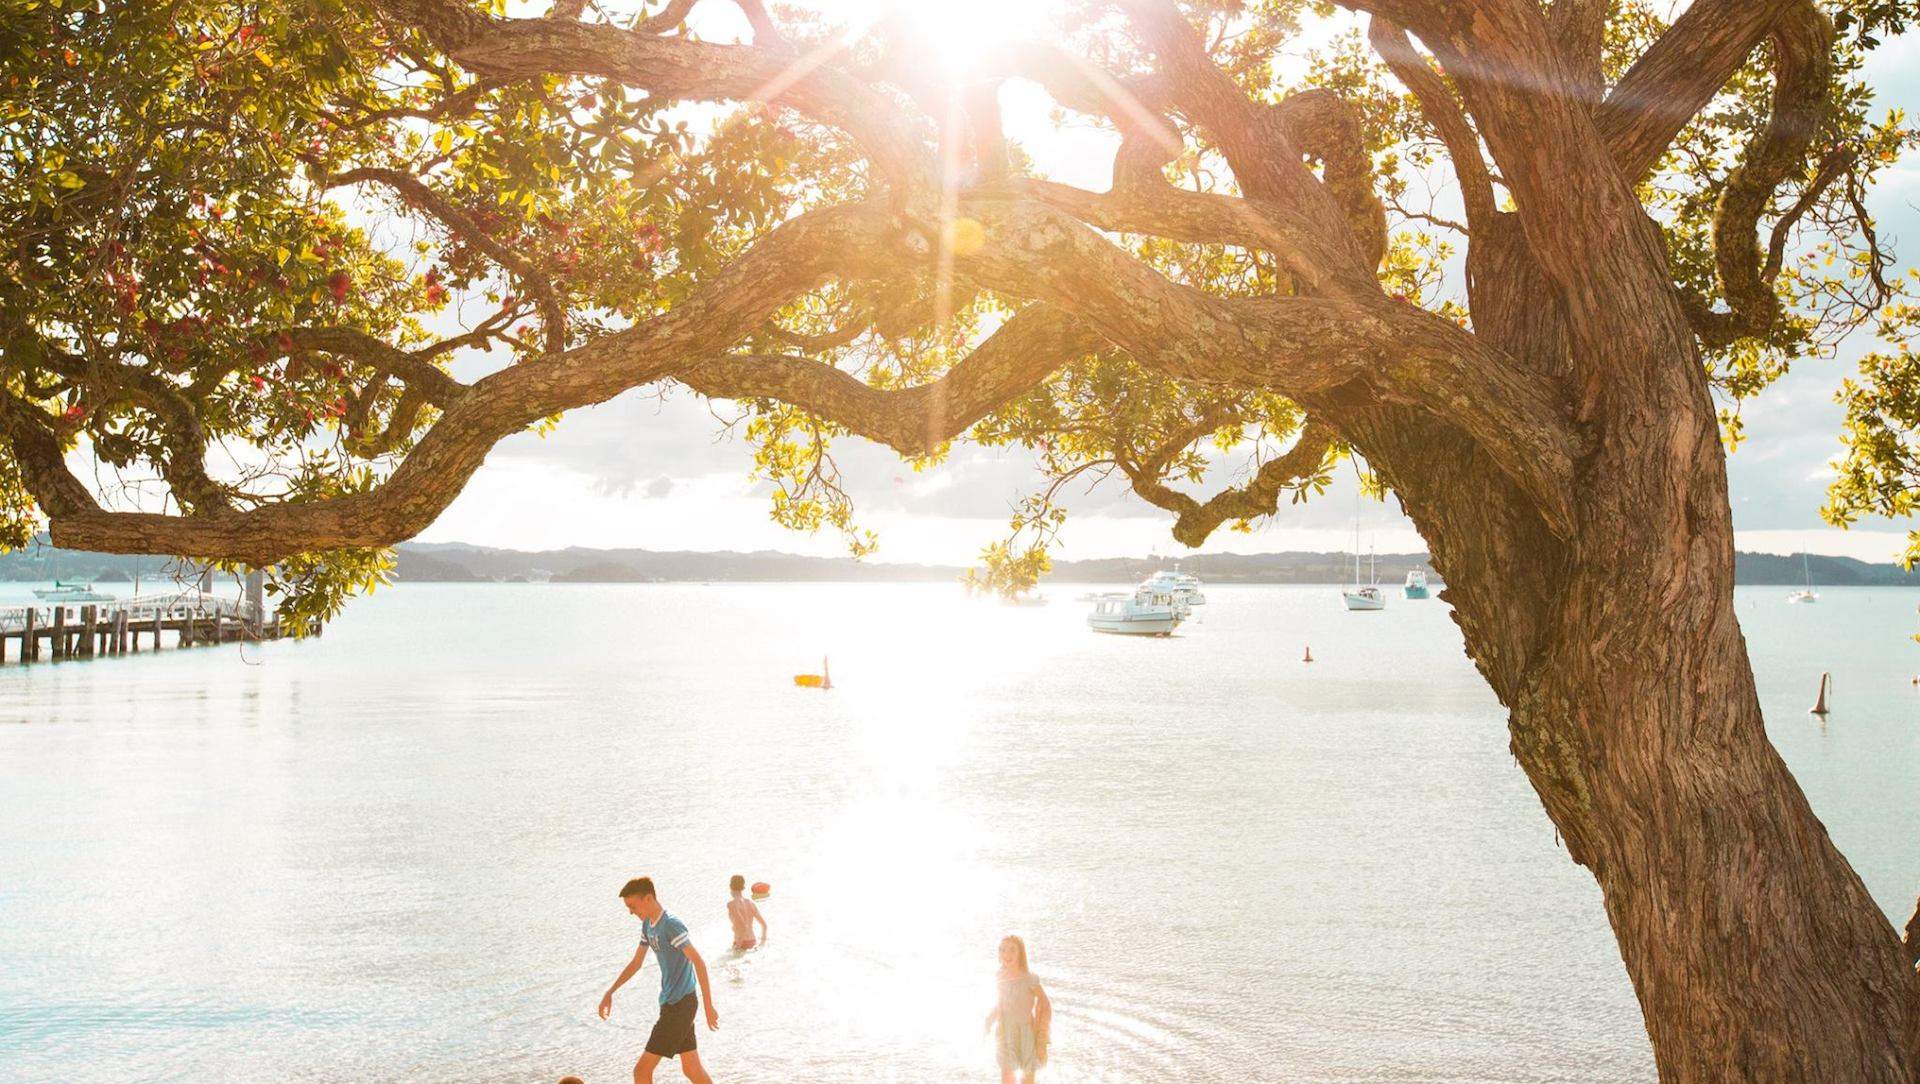 A Weekender's Guide to New Zealand's Bay of Islands